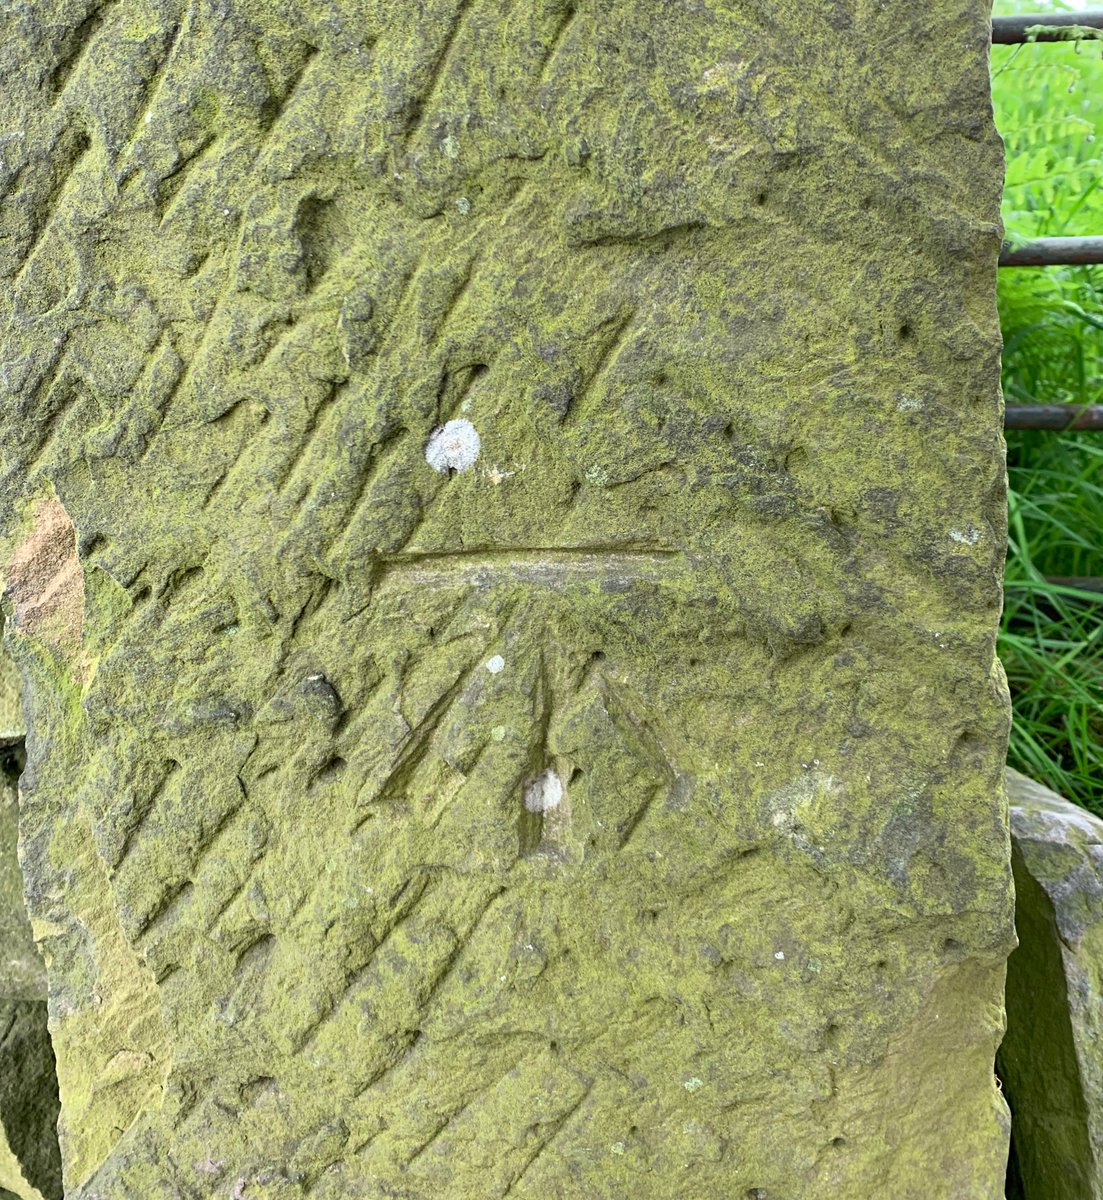 It’s a happy day when you spot a cut mark on an old gatepost that doesn’t appear on the Benchmark Database.

On a lane/footpath between Sandbed Lane and Kirks Lane, Belper.